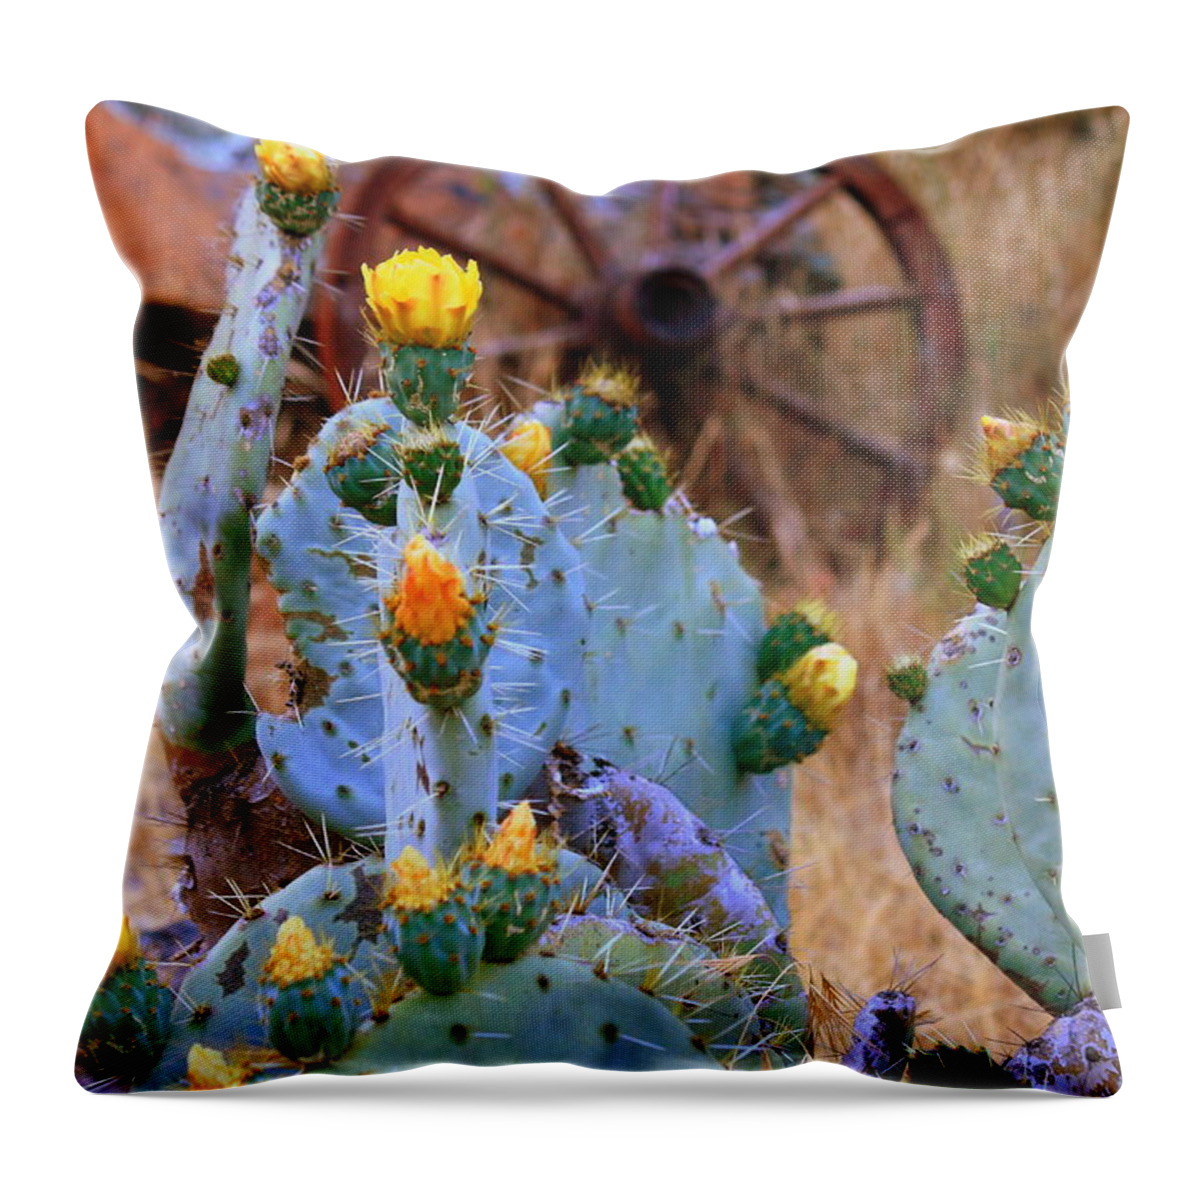 Old Throw Pillow featuring the photograph The Old West by Patrick Witz